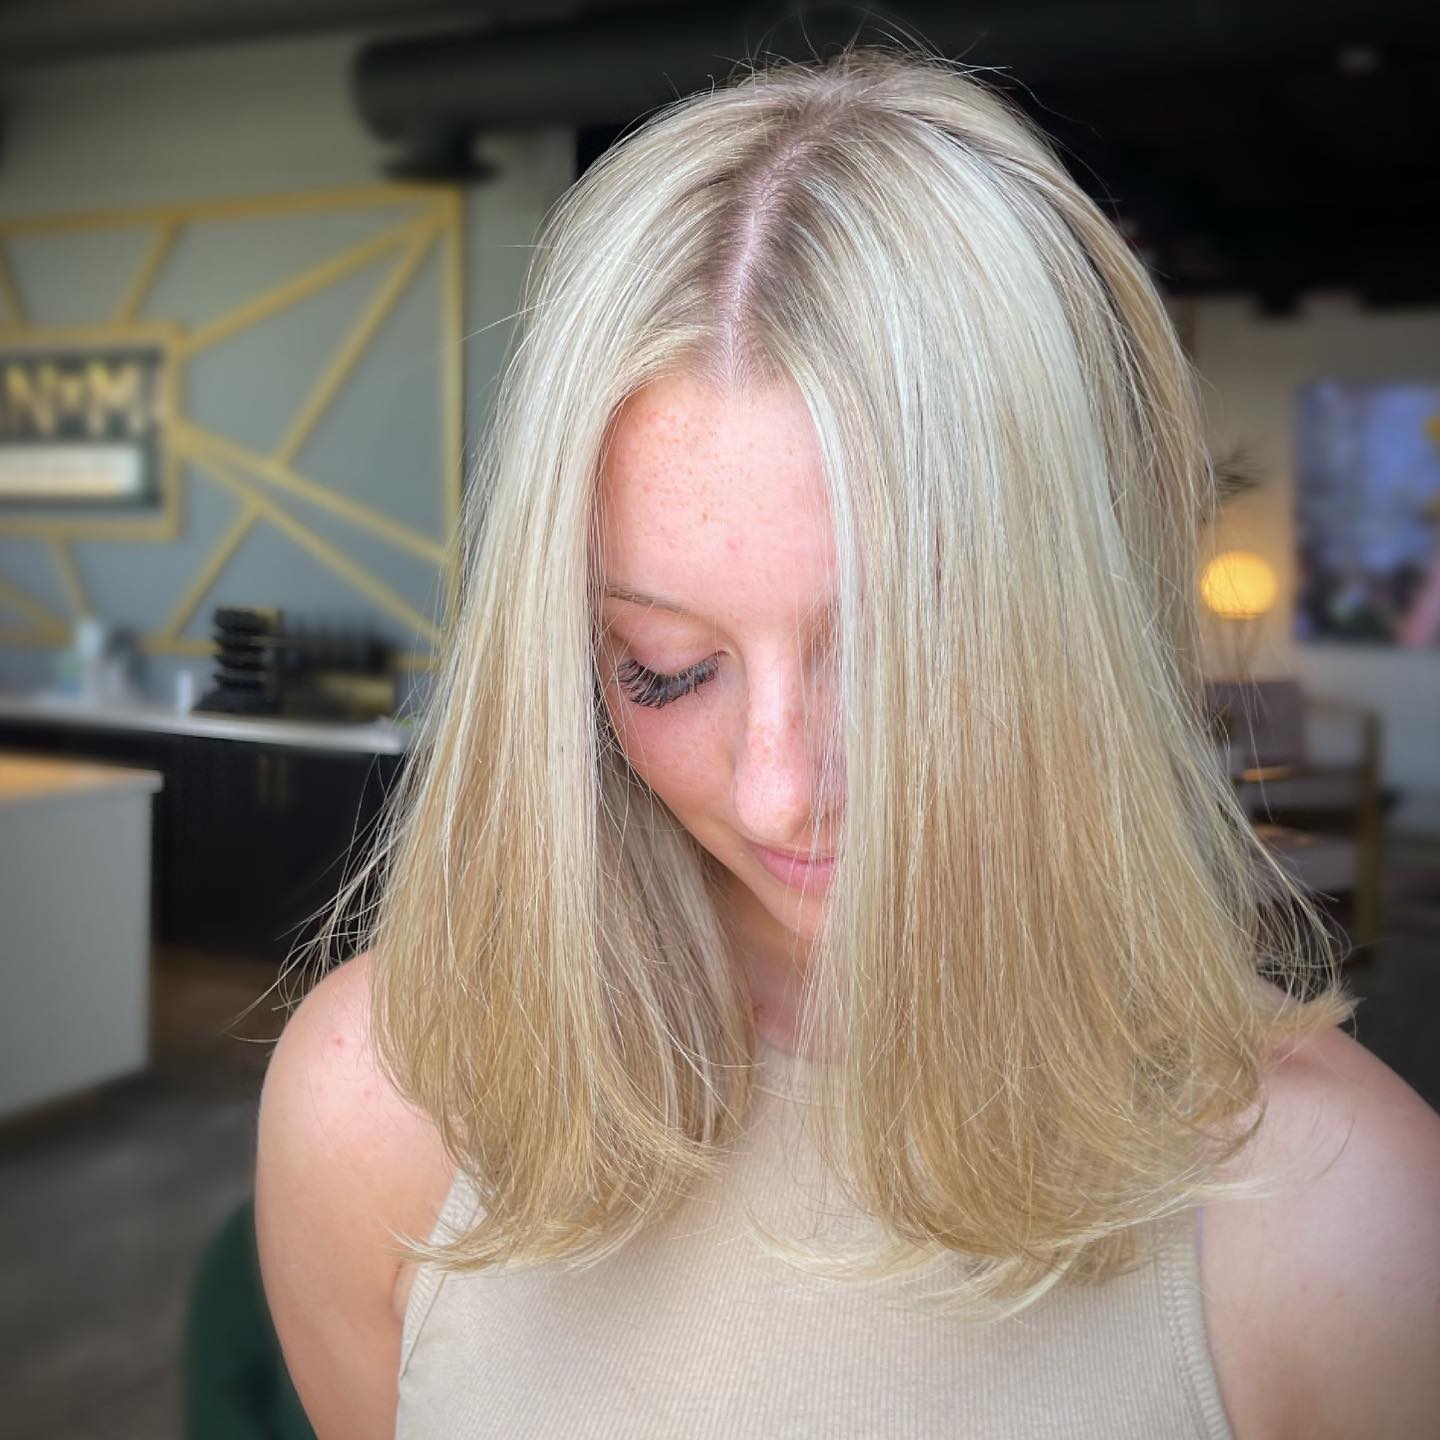 Downward shot of blonde woman’s part showing shiny, healthy hair and scalp.